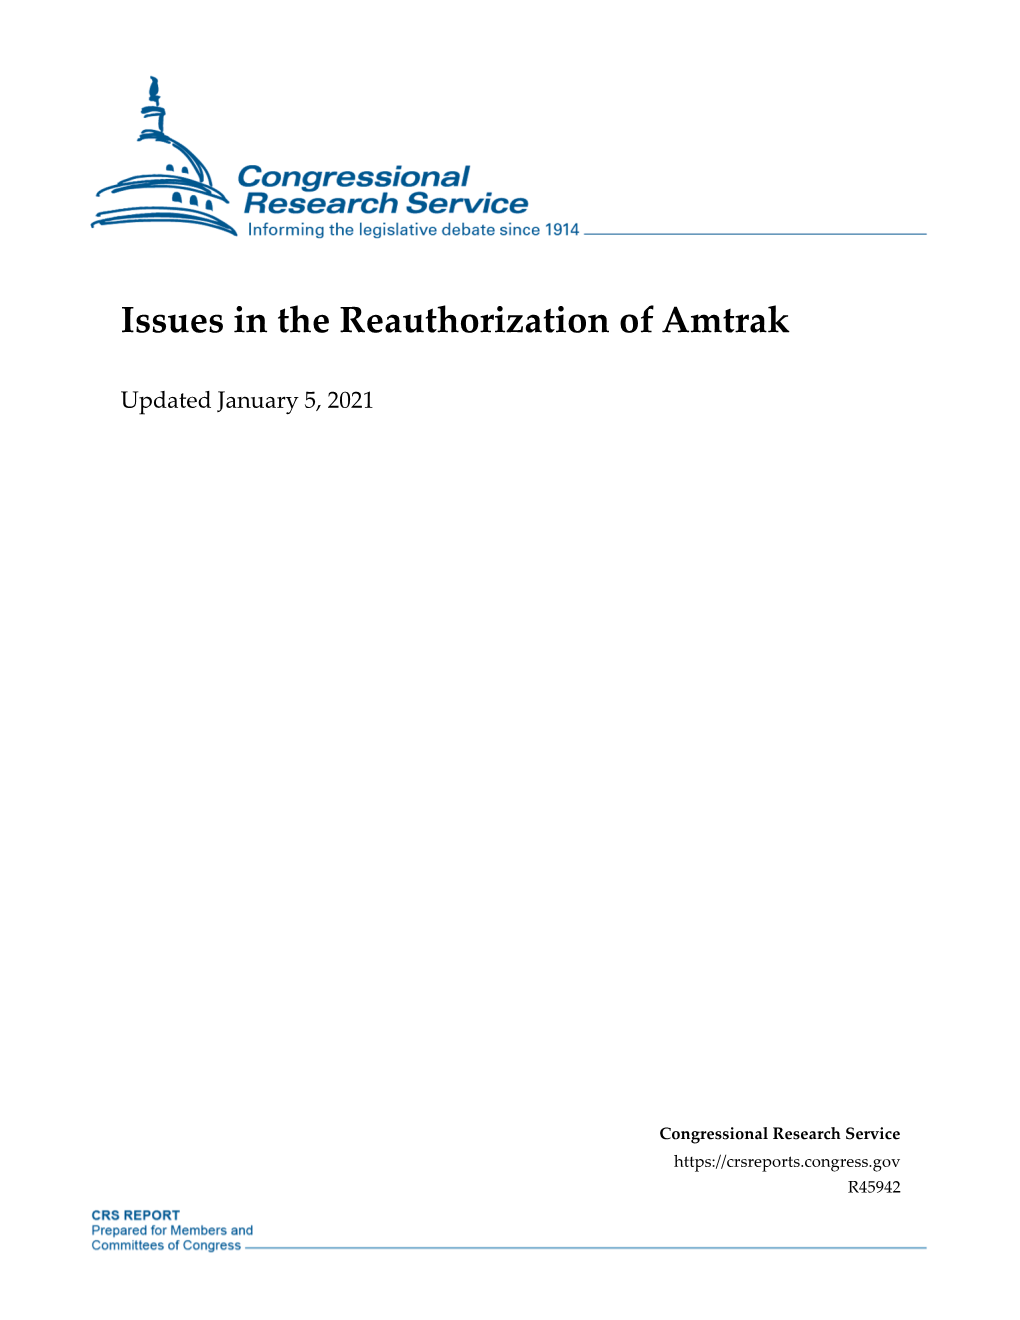 Issues in the Reauthorization of Amtrak